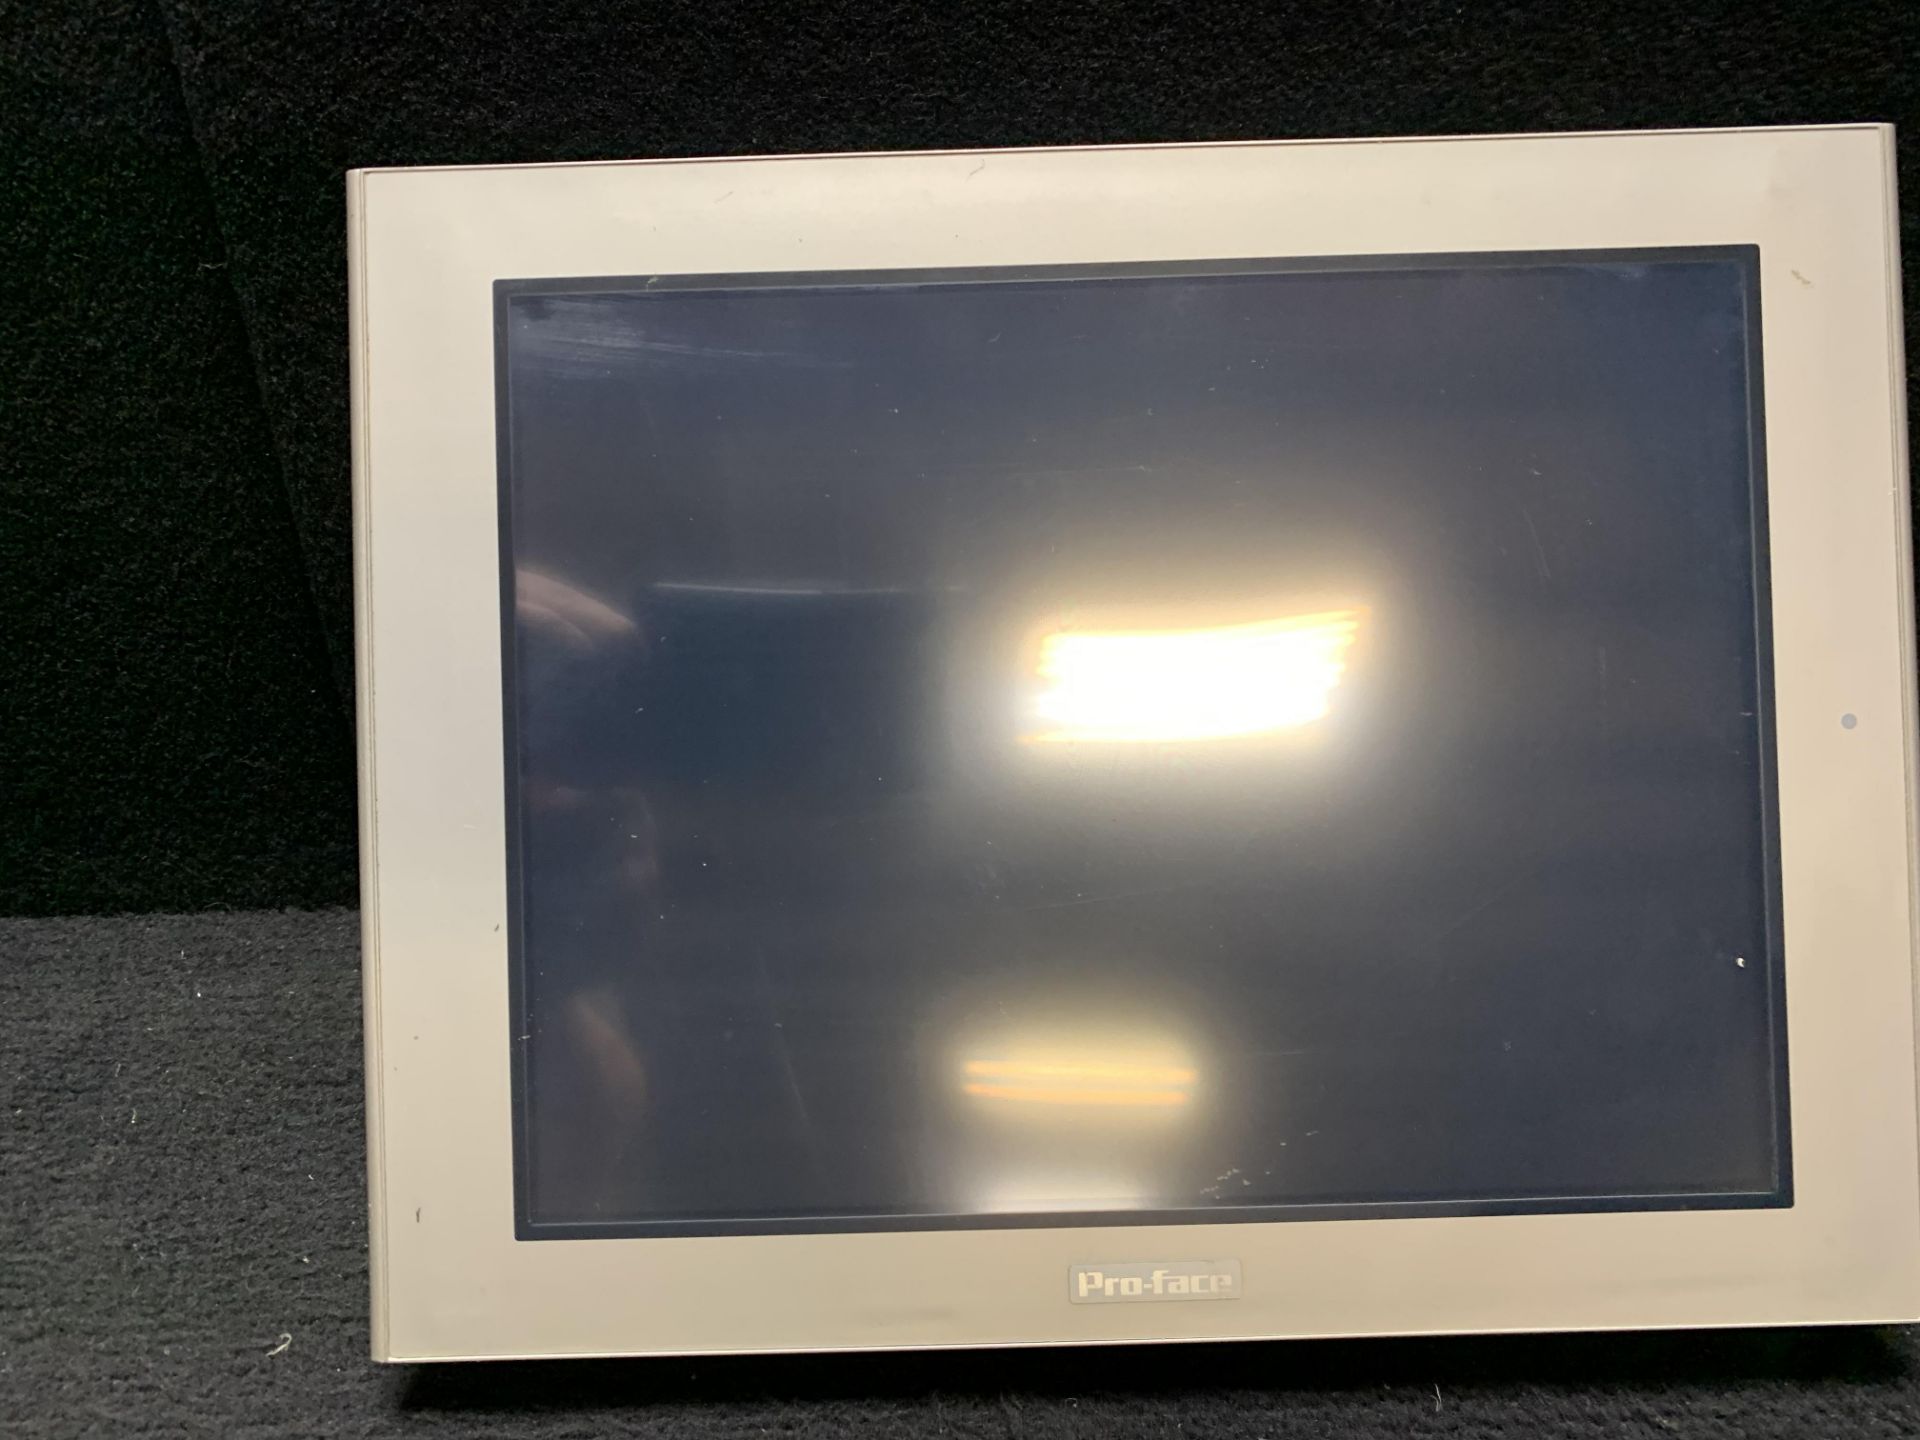 DIGITAL PRO-FACE 3280035-01 OPERATOR INTERFACE TOUCHSCREEN AGP3400-T1-D24 - Image 2 of 8